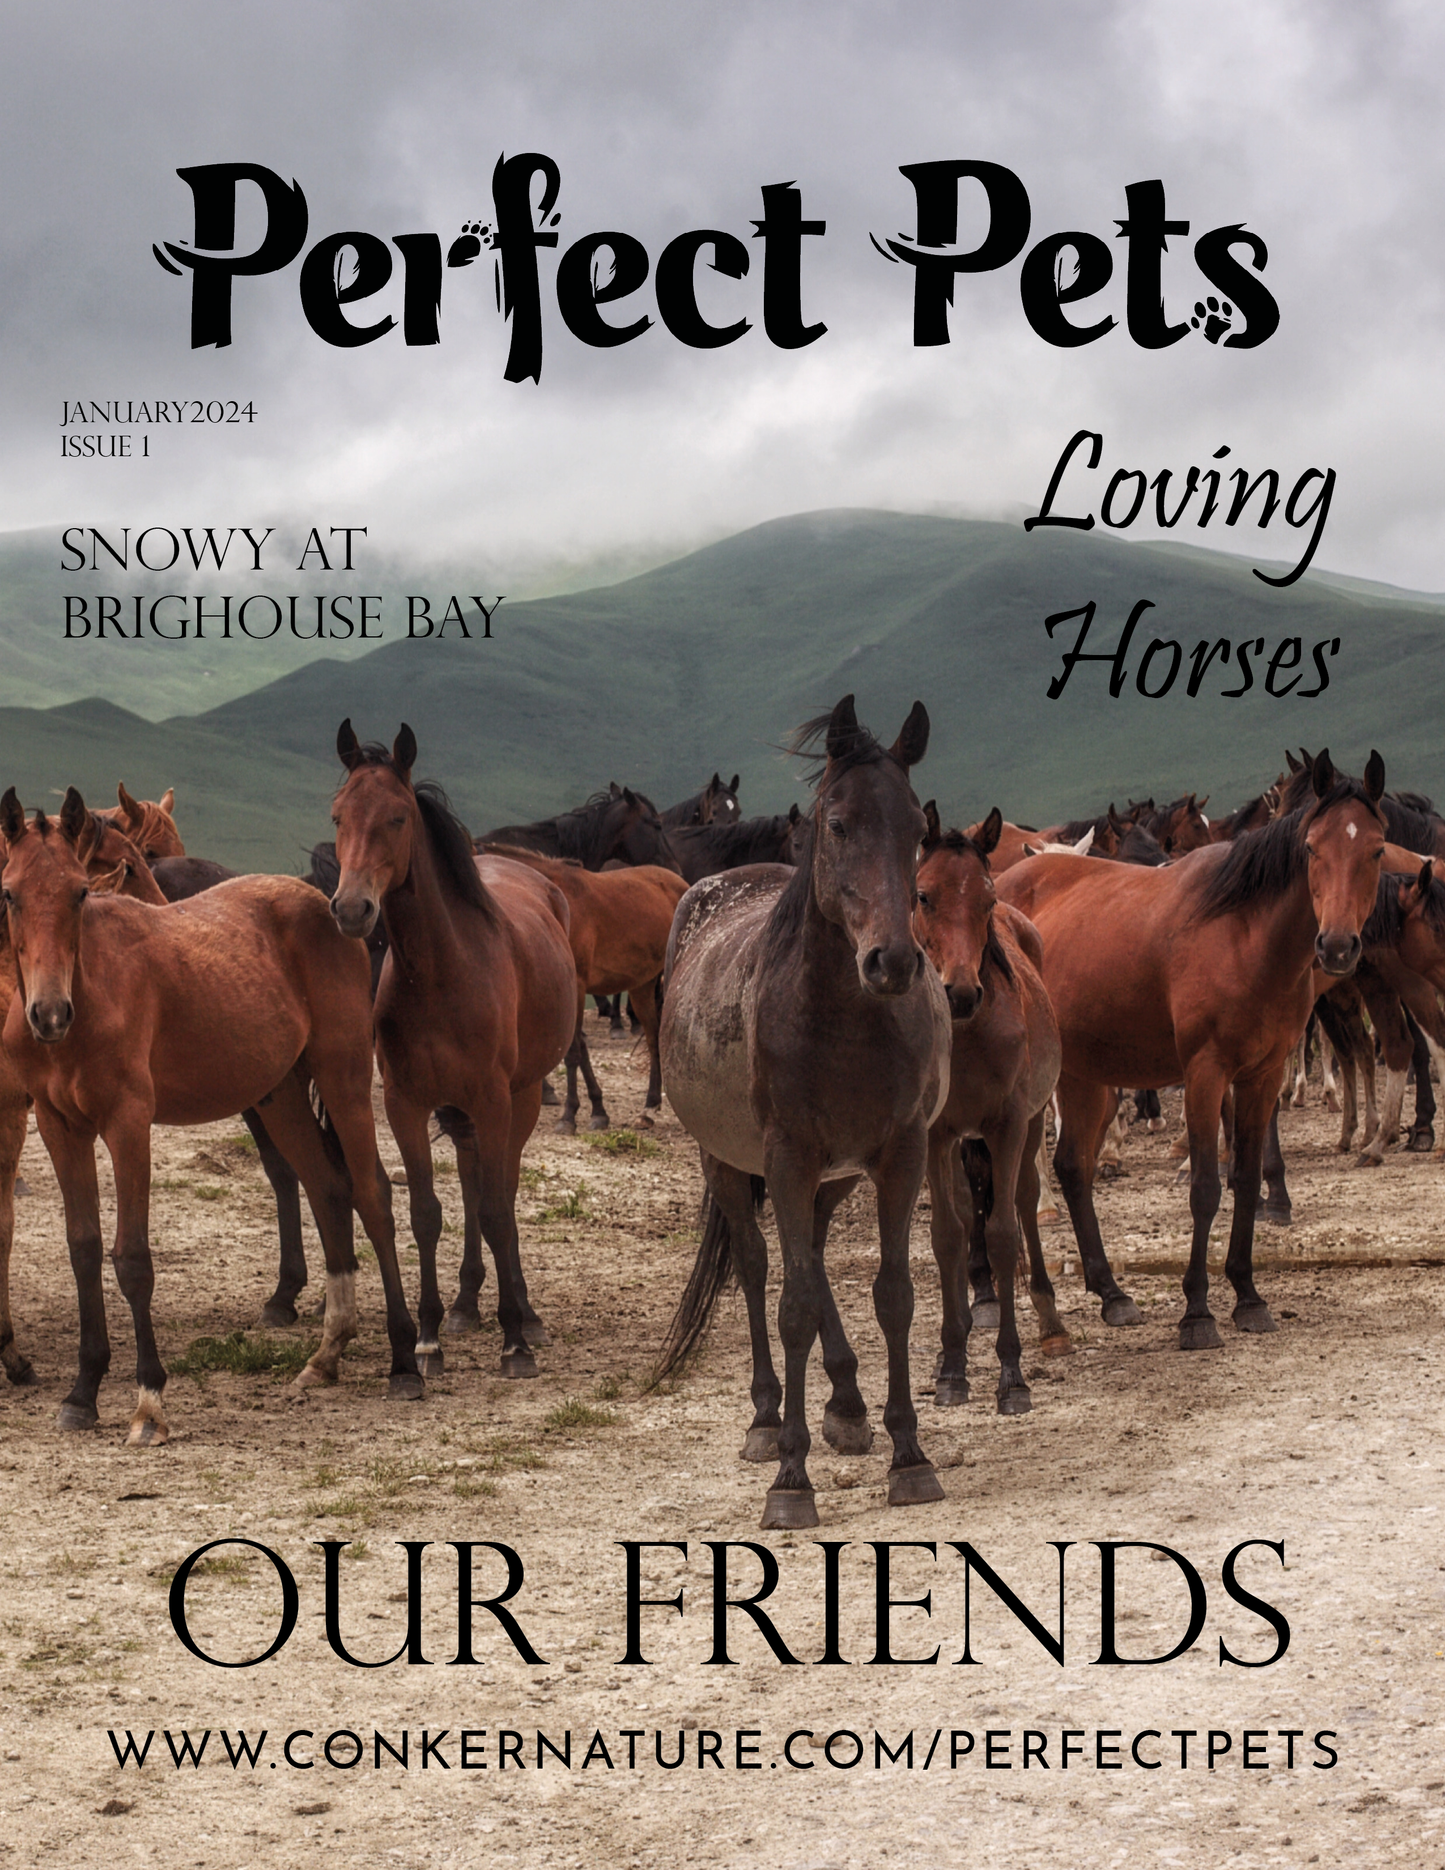 Perfect Pets Magazine - January 2024 Issue I: The Equestrian Edition Issue 1